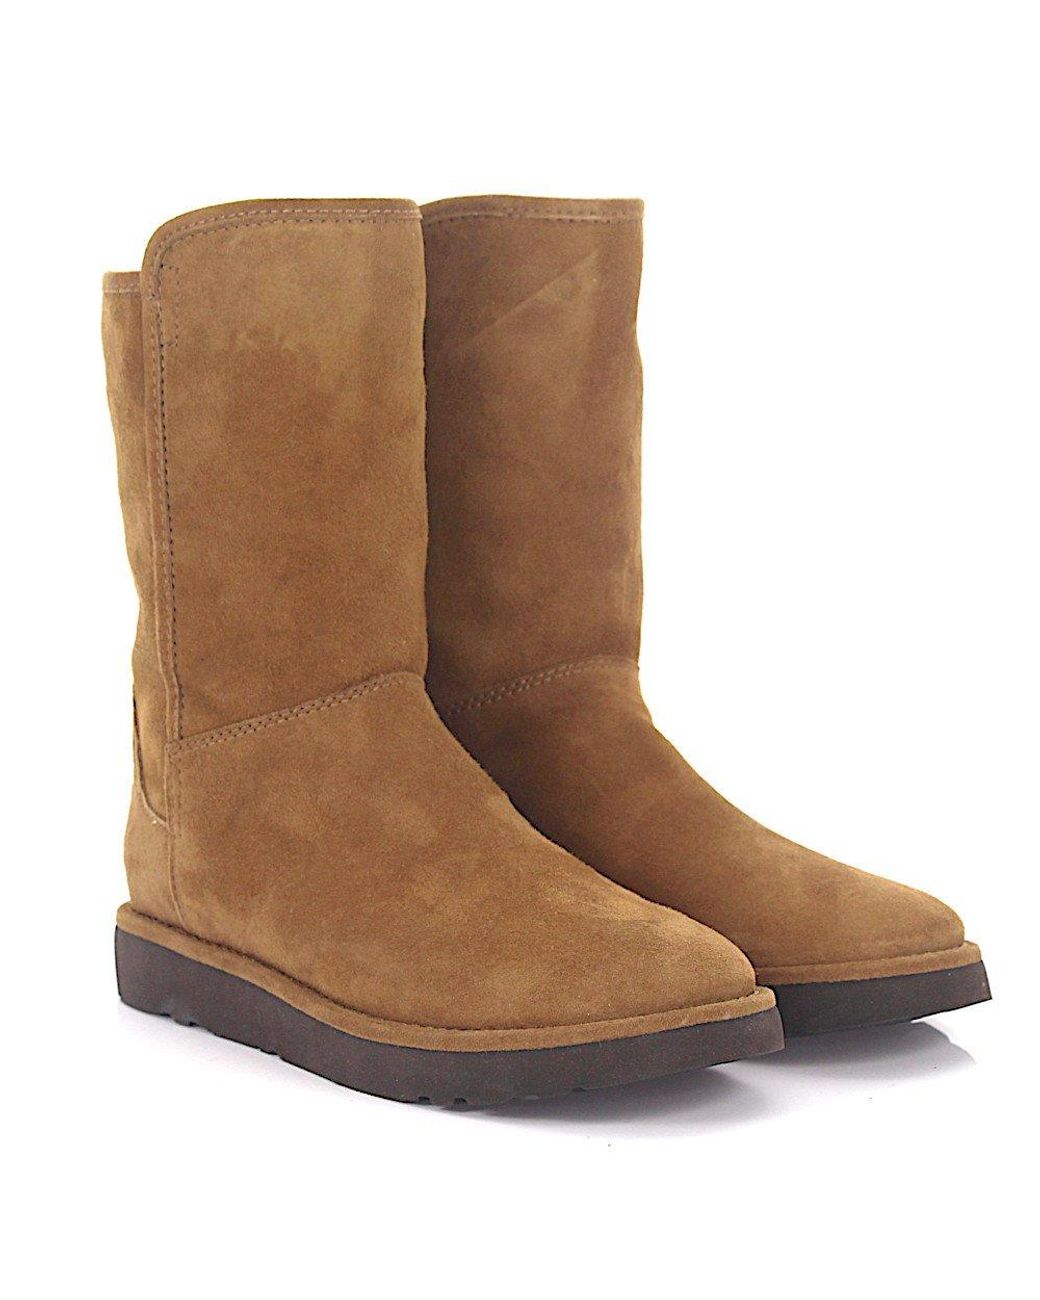 UGG Ankle Boots Calfskin Suede Logo Brown in Beige (Natural) - Lyst